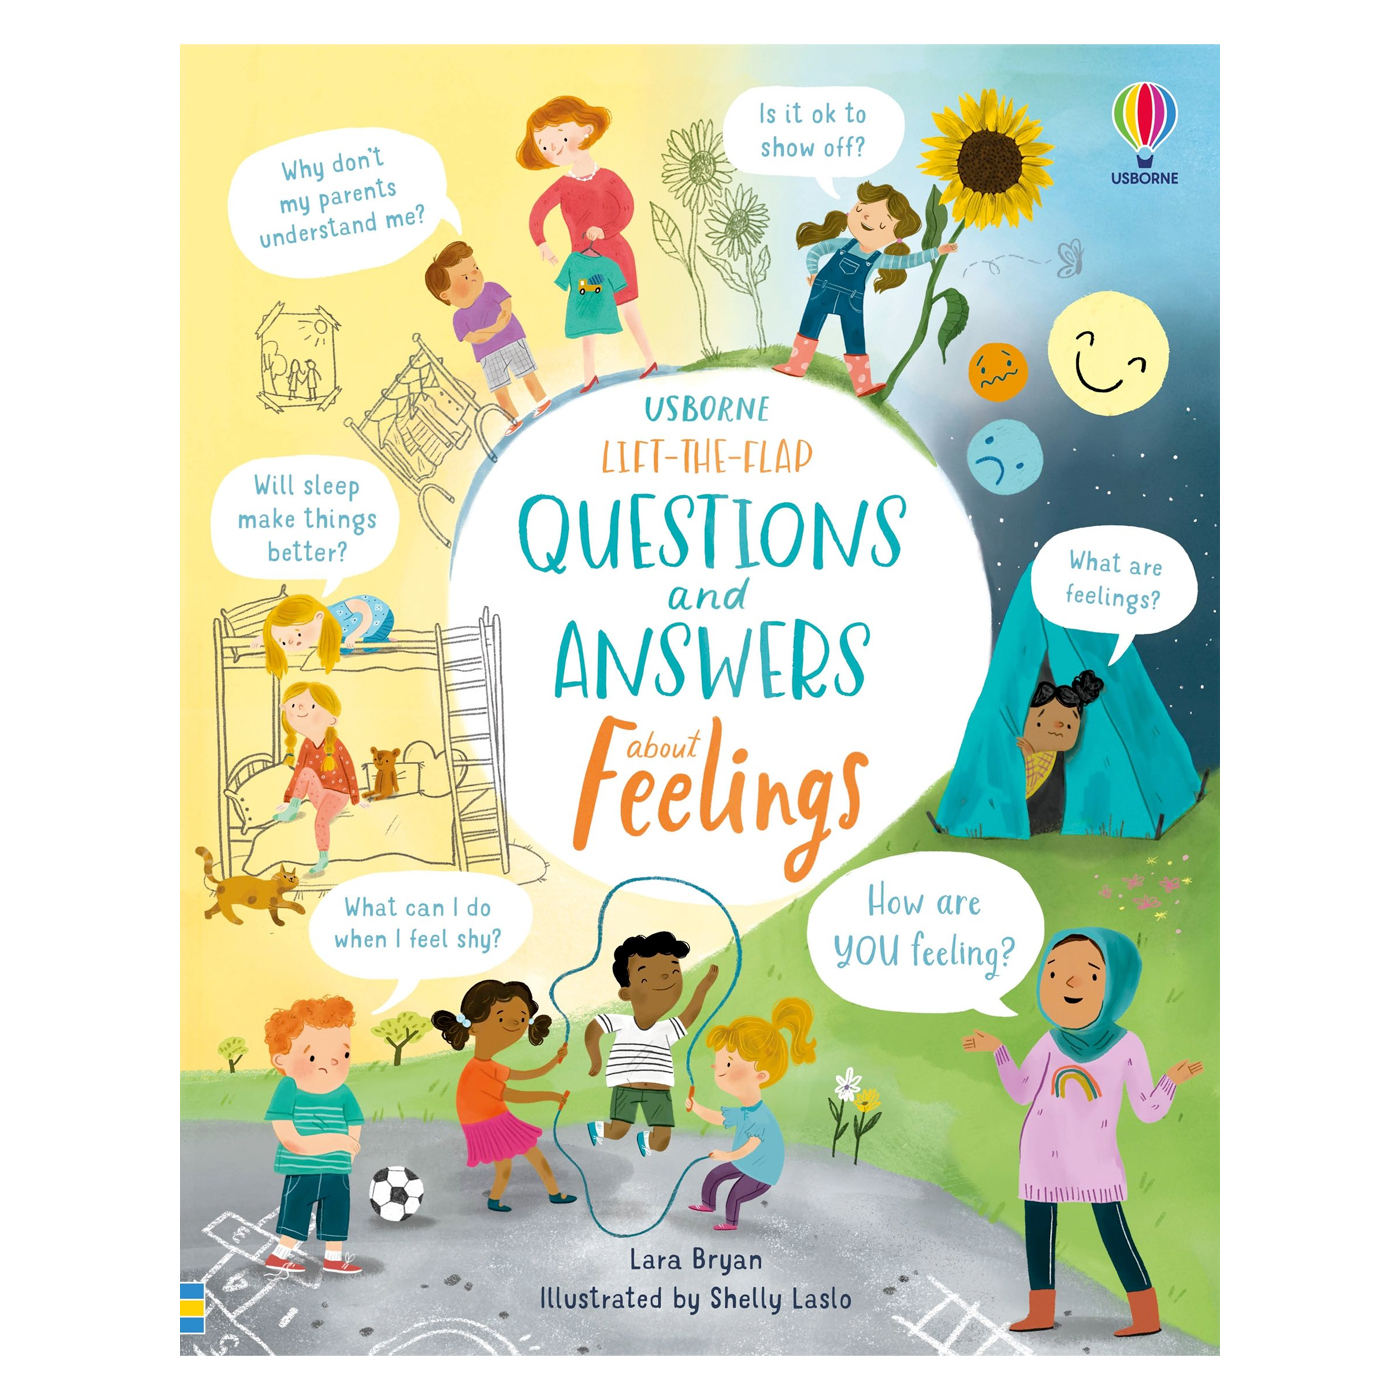  Lift-the-Flap Questions and Answers About Feelings